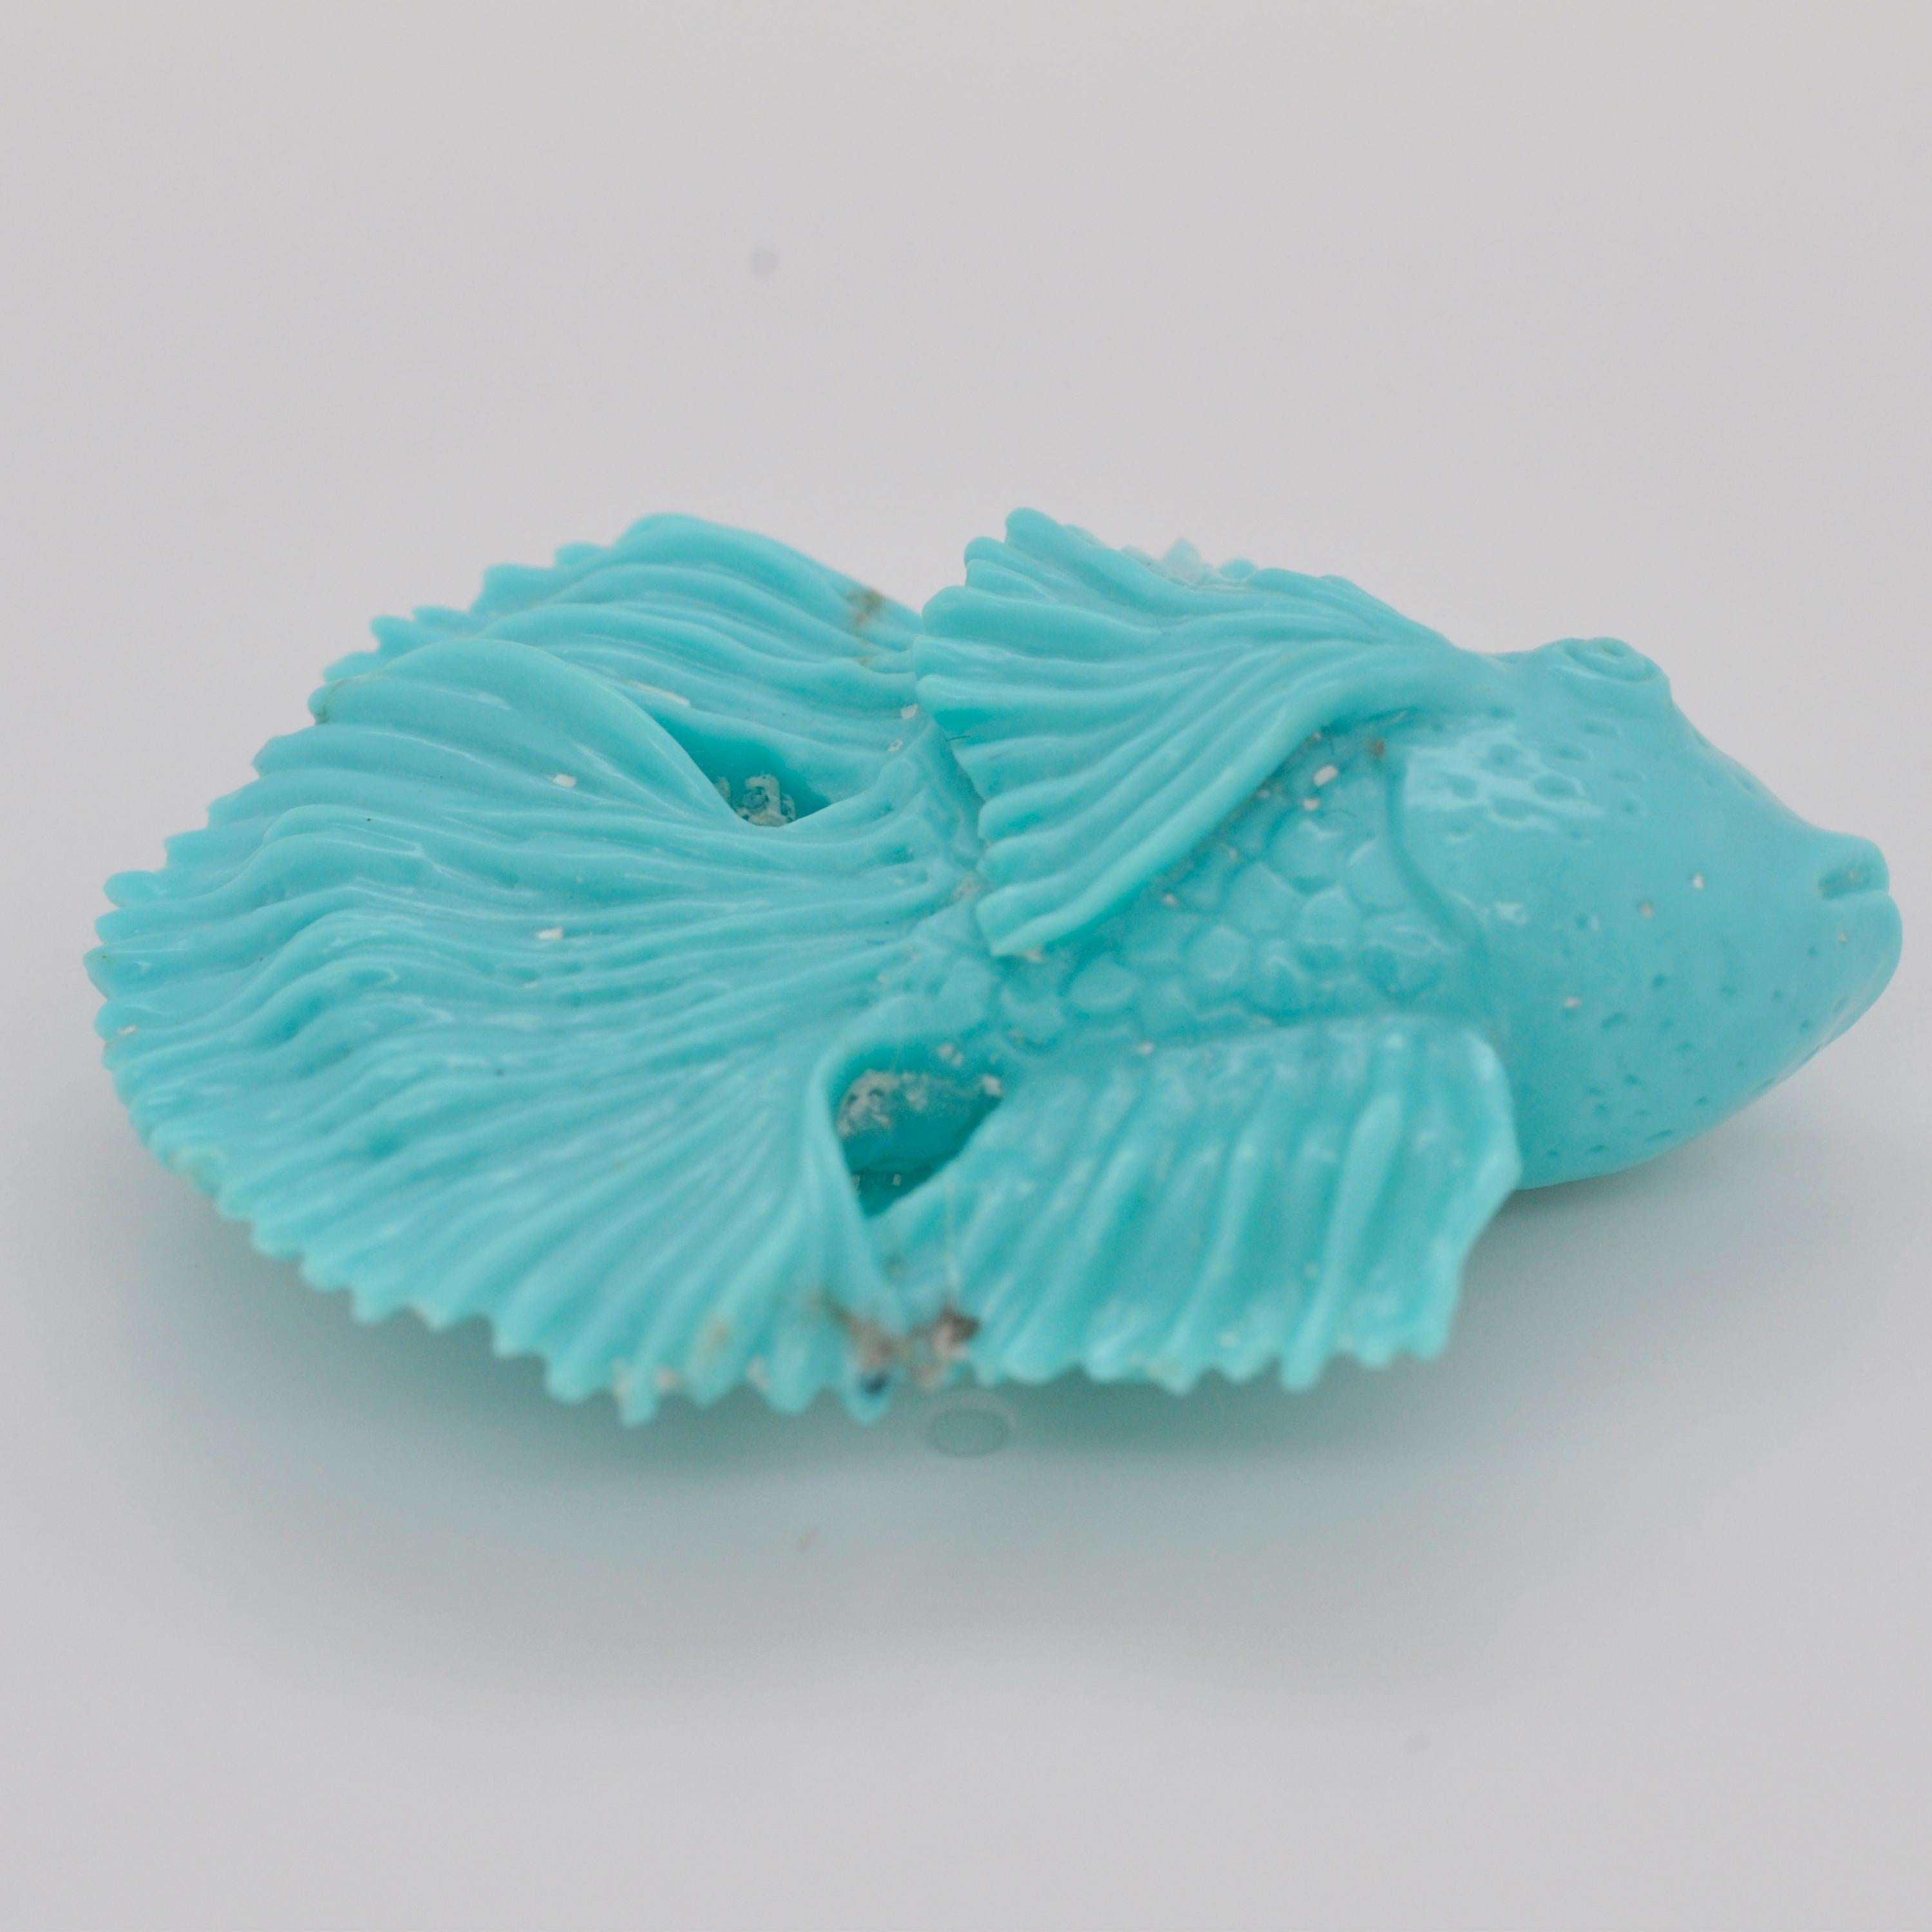 Hand Carved 42.23 Carats Natural Arizona Turquoise Fish Loose Gemstone For Sale 2